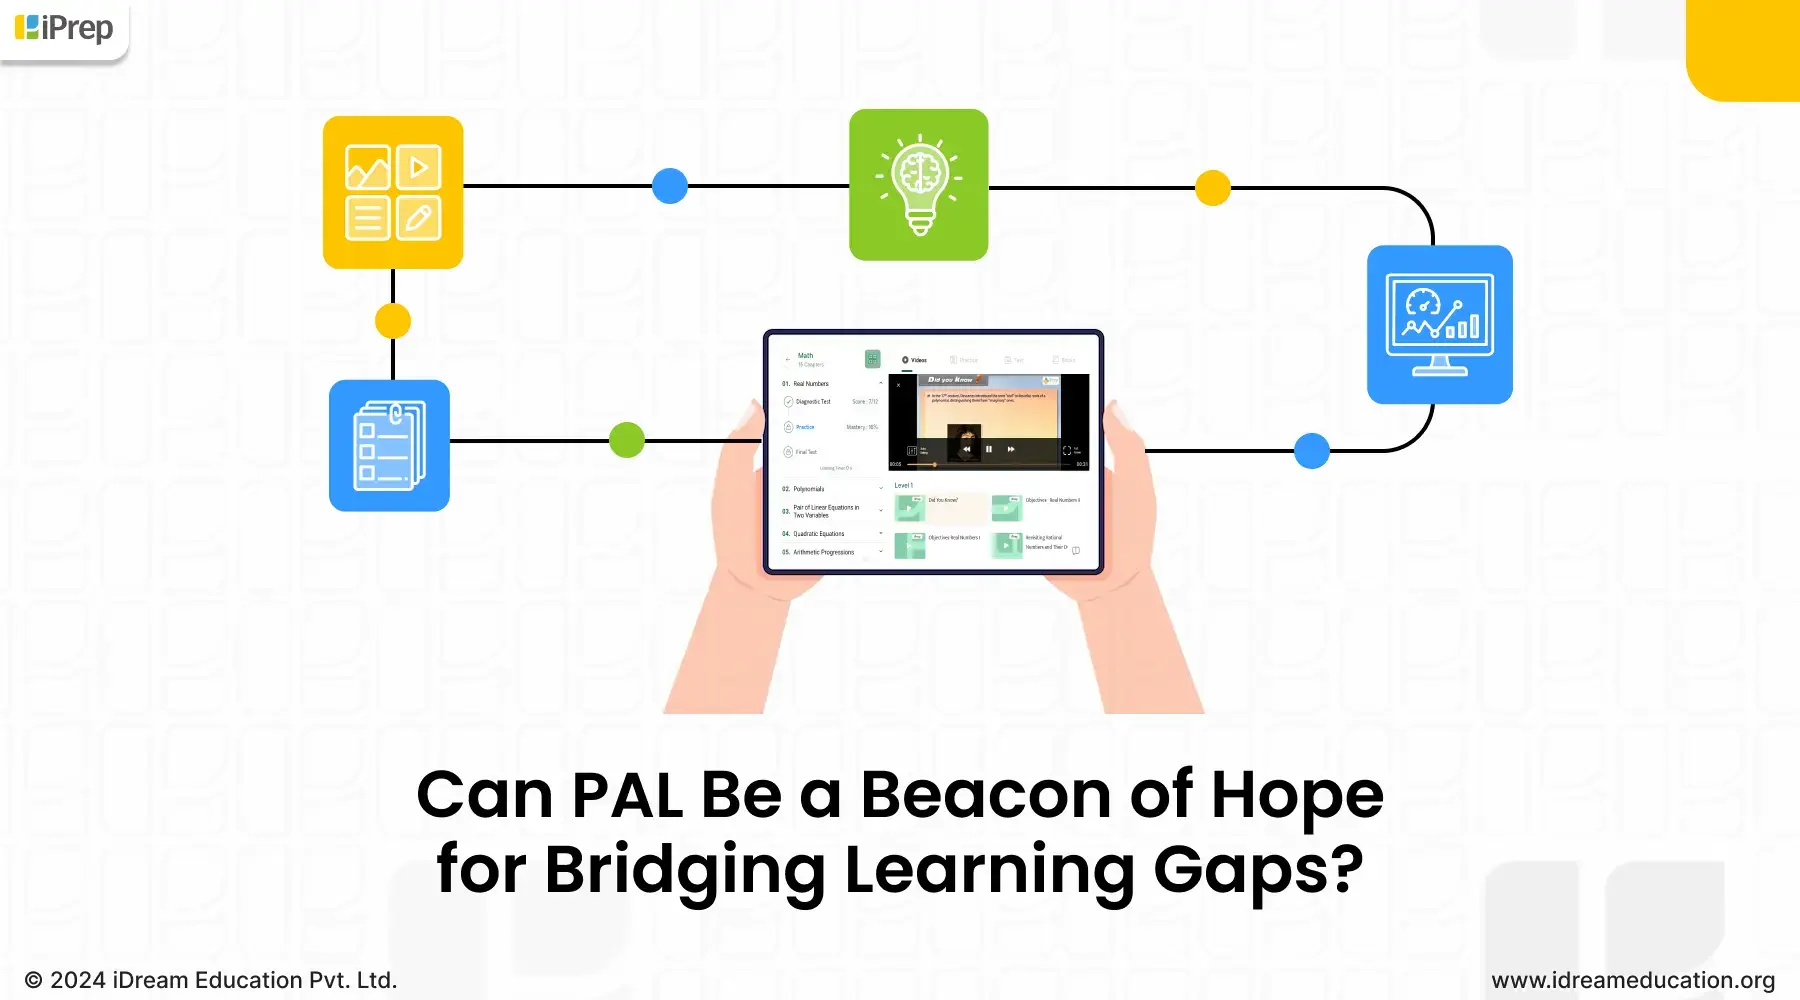 Illustration depicting personalized and adaptive learning is a guided mechanism that can bridge learning gaps in Indian students